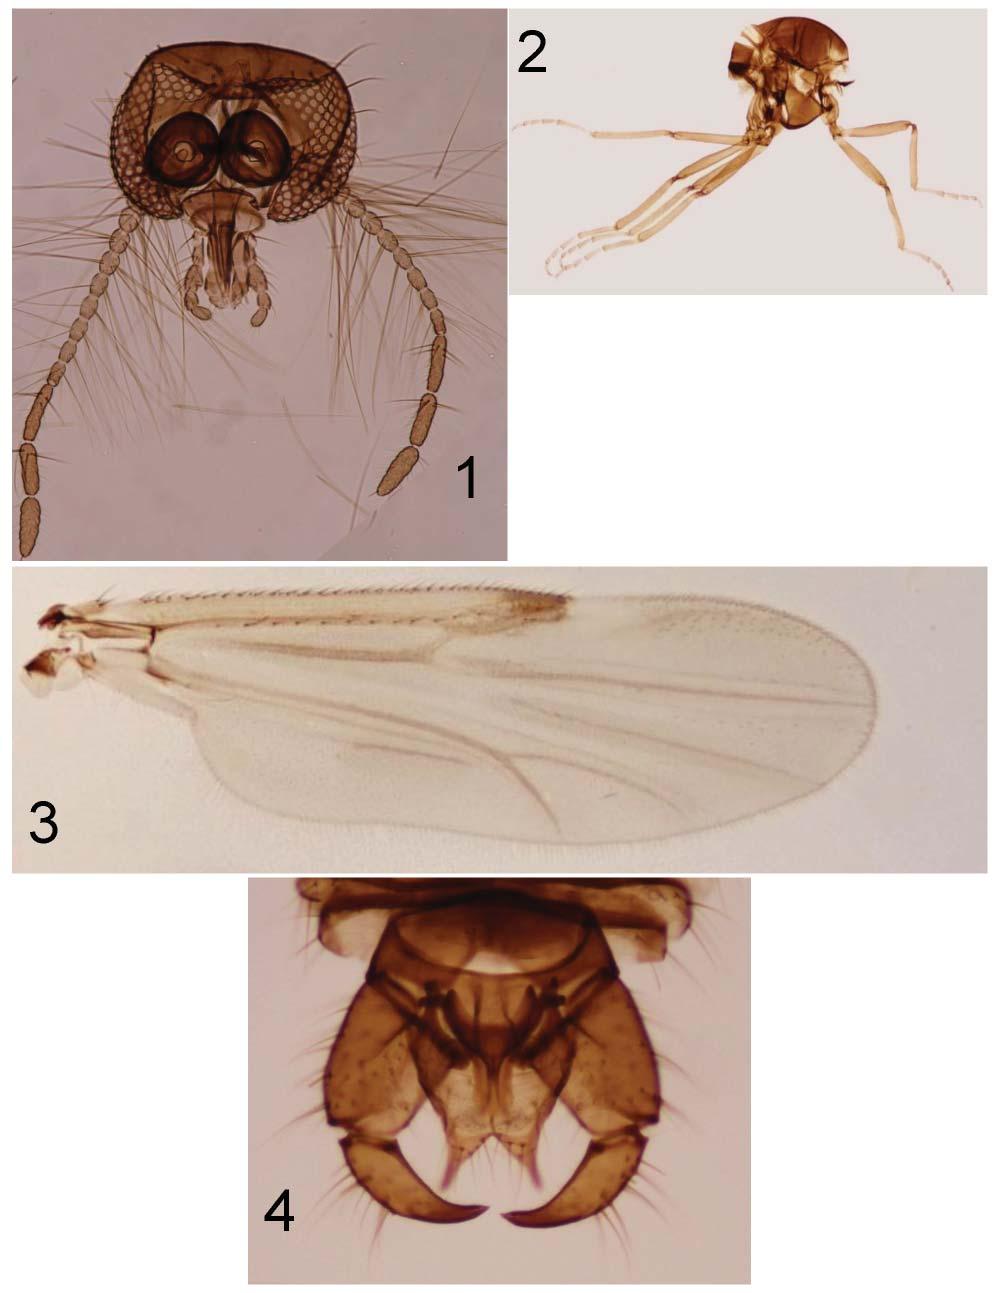 A REVISION OF THE BITING MIDGES INSECTA MUNDI 0441, August 2015 15 Figures 1 4.